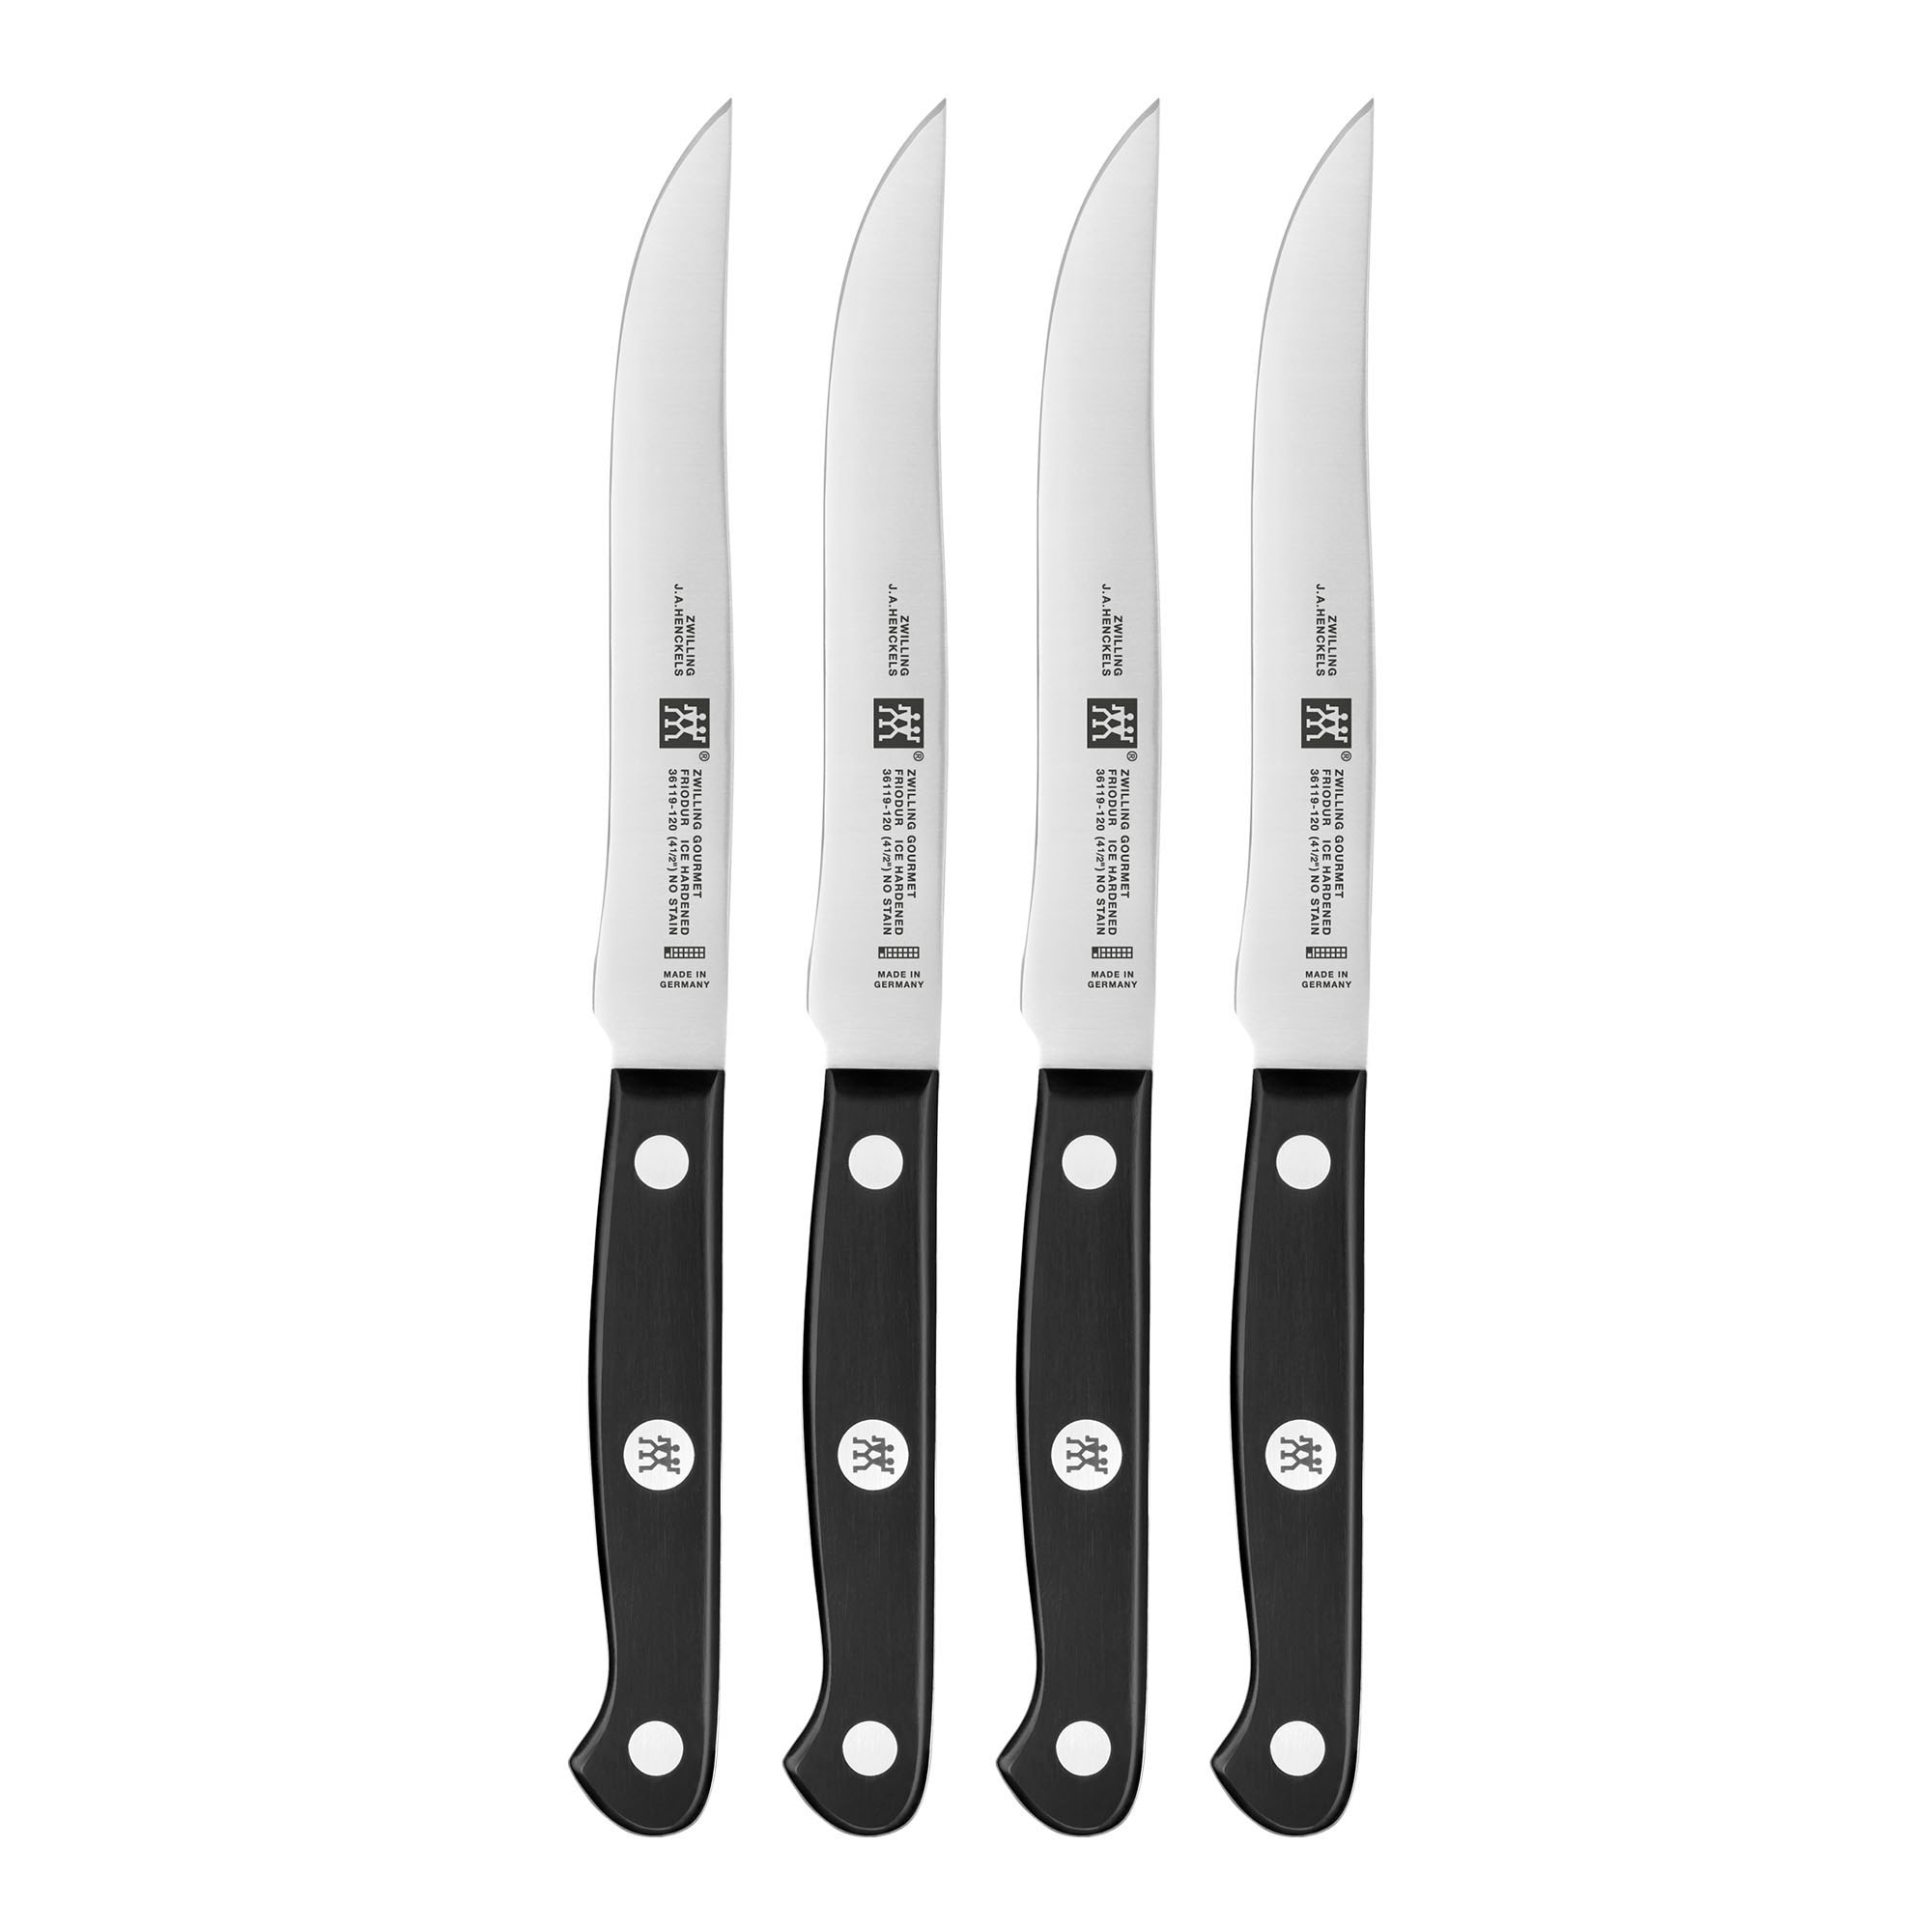 https://ak1.ostkcdn.com/images/products/is/images/direct/46aa60d24ac024dd43b390296b8895ee0927c1ea/ZWILLING-Gourmet-4-pc-Steak-Knife-Set.jpg